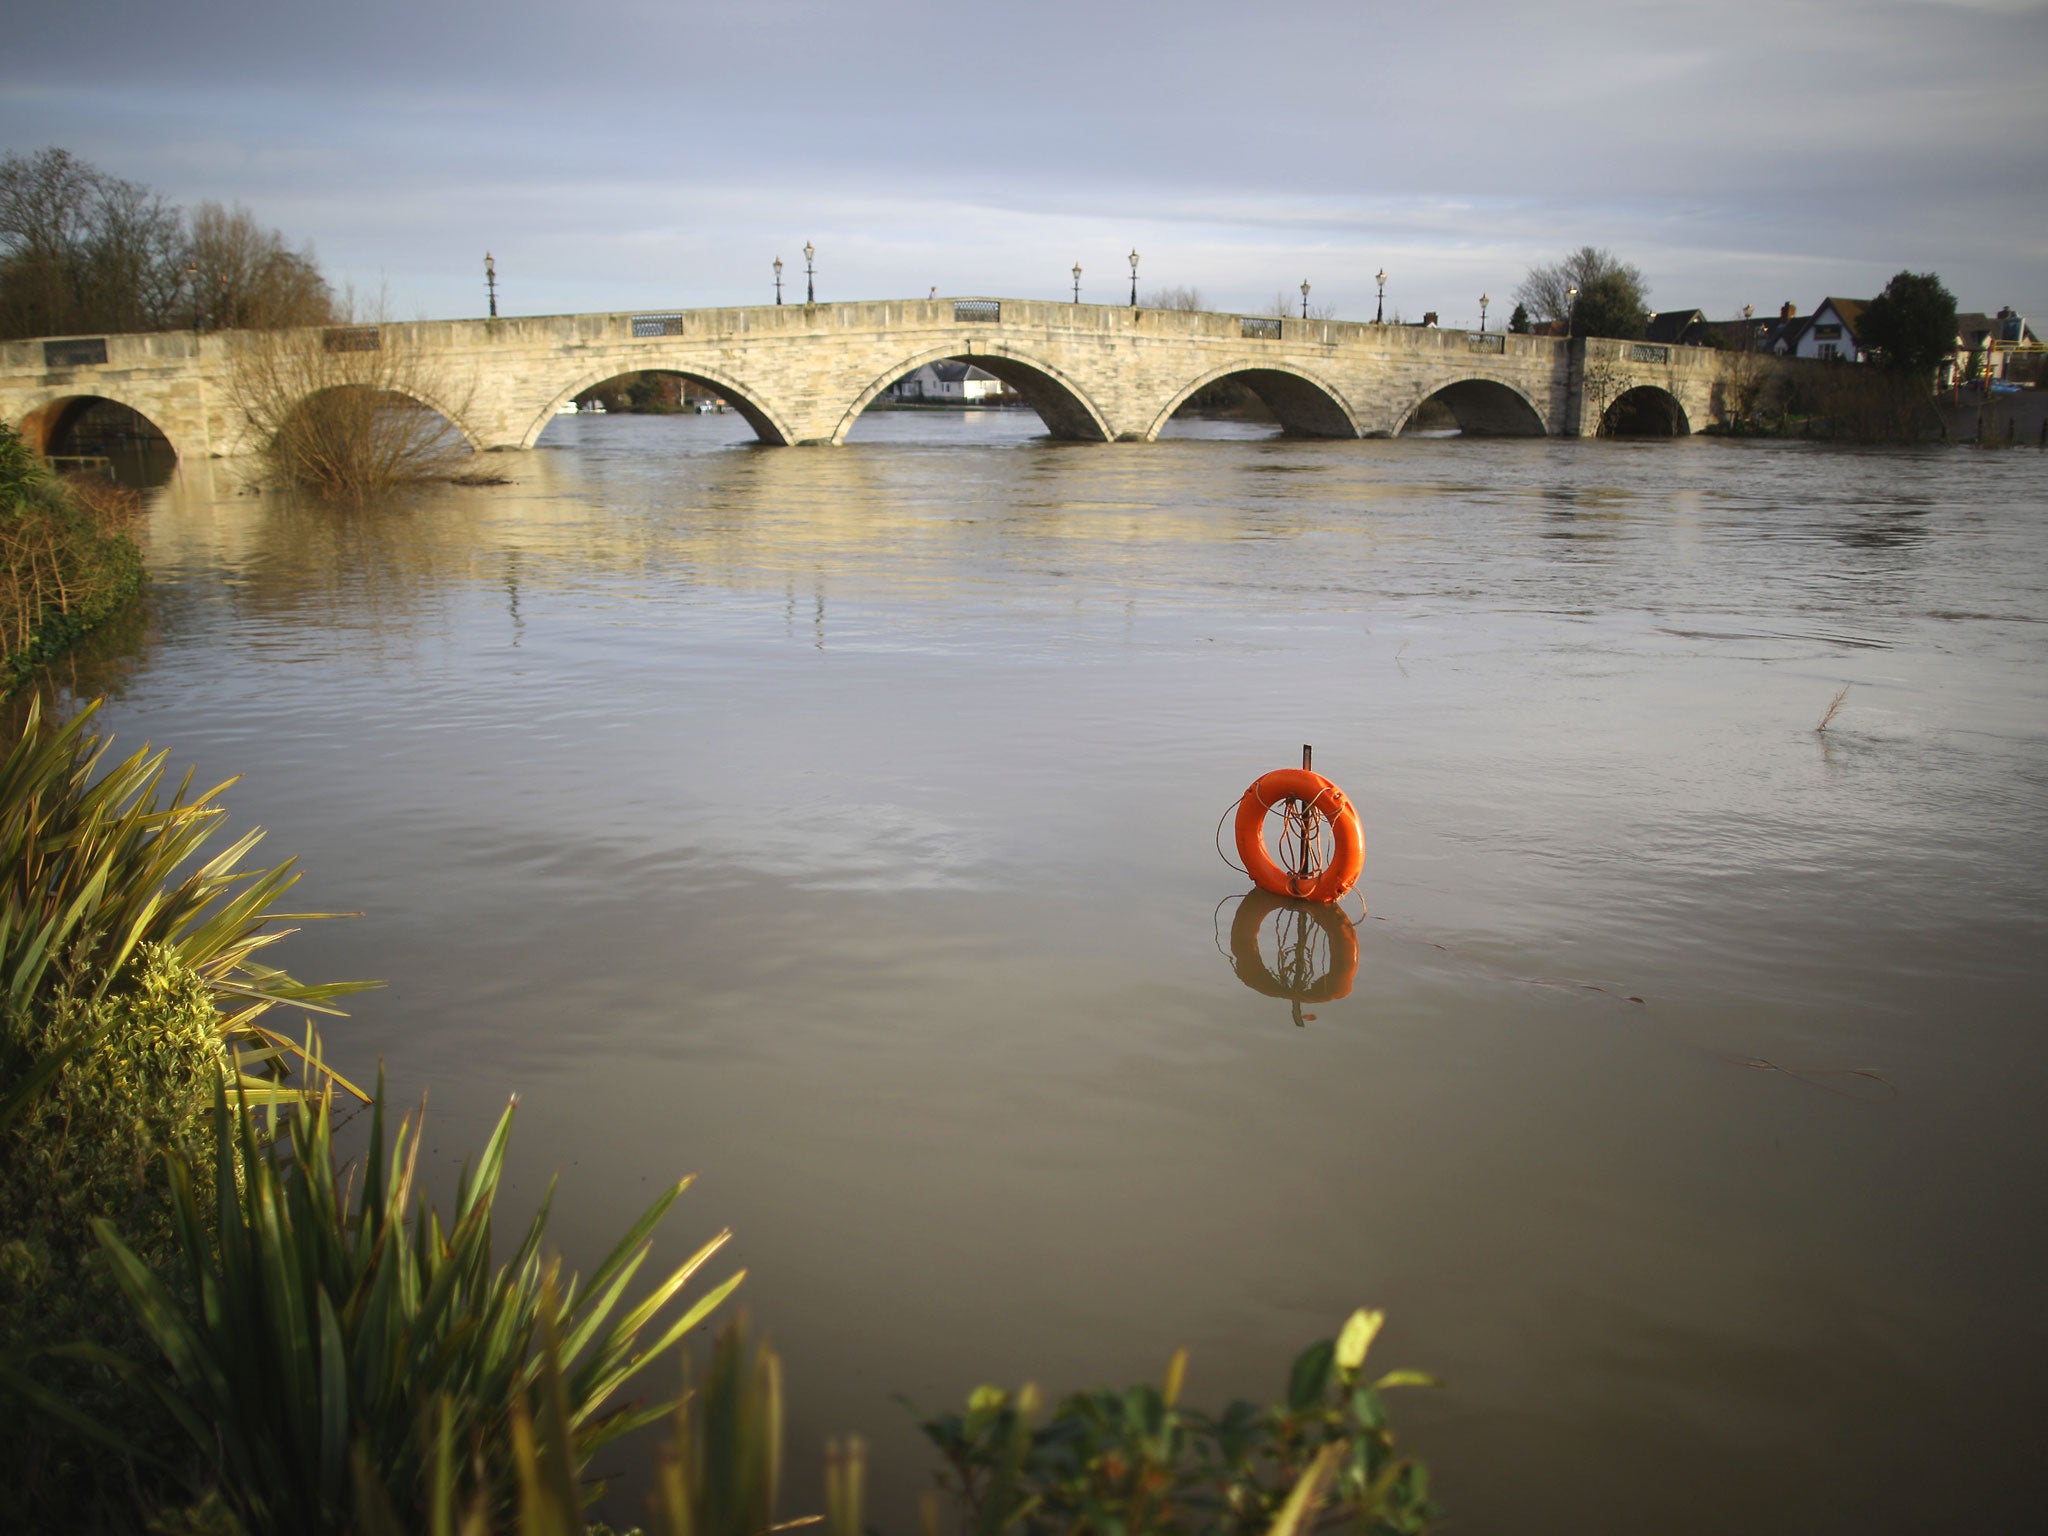 A lifebelt is almost submerged after the River Thames flooded in Chersey